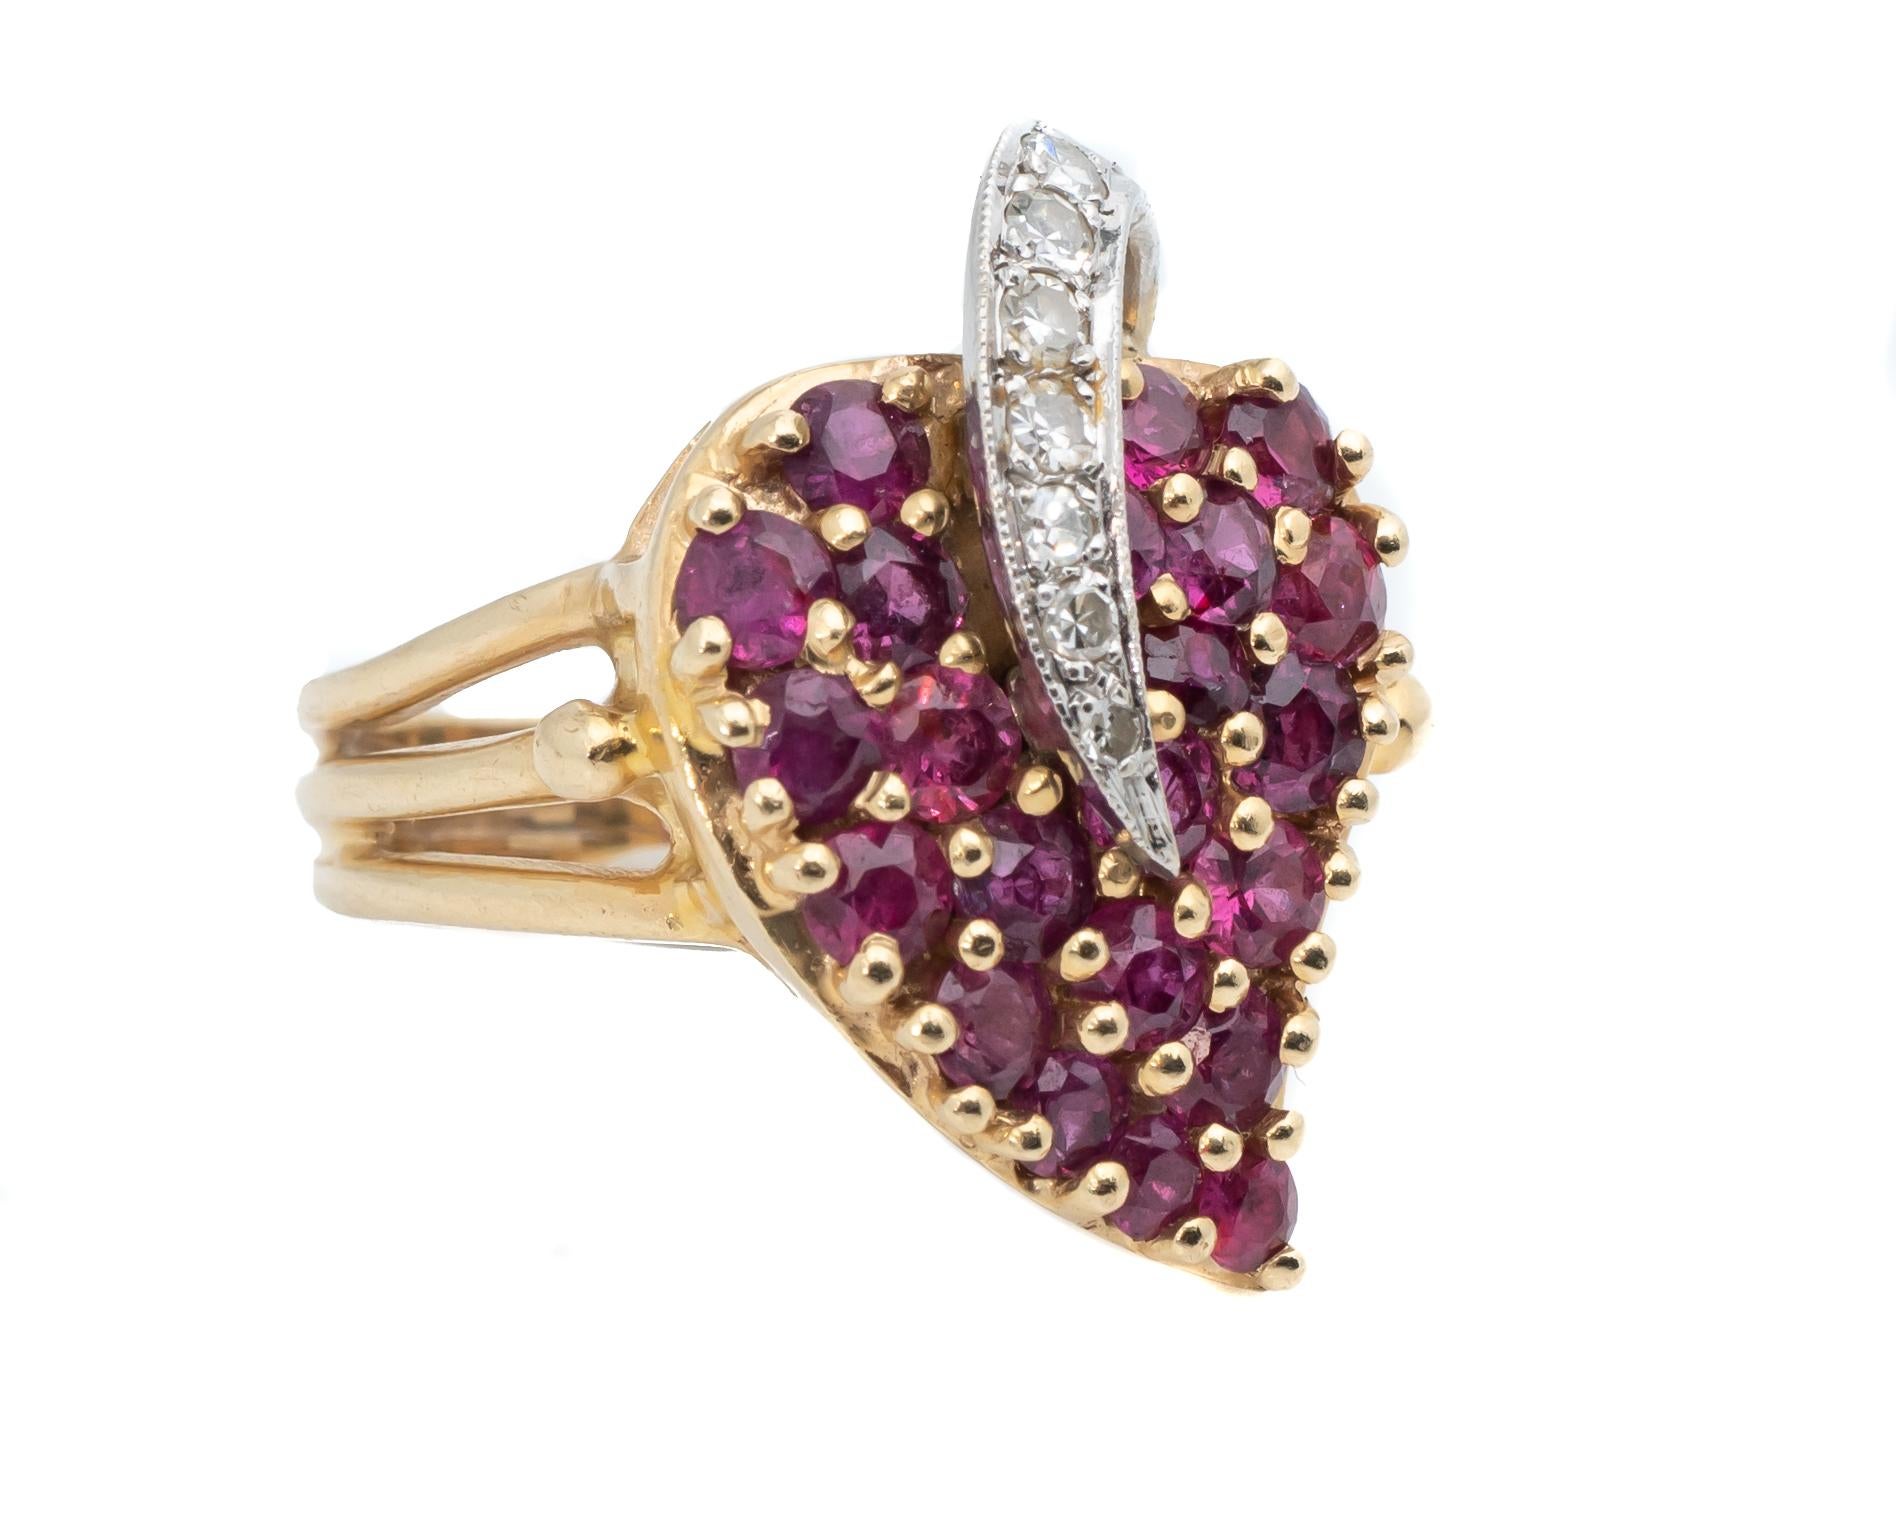 14 Karat Yellow Gold Ring featuring a heart shape display of rubies and accent diamonds
The ring also features a split shank (three row) on the sides tapering down into one a wide shank

Ring Details:
Gold: 14 Karat Yellow Gold (hallmarked)
Weight: